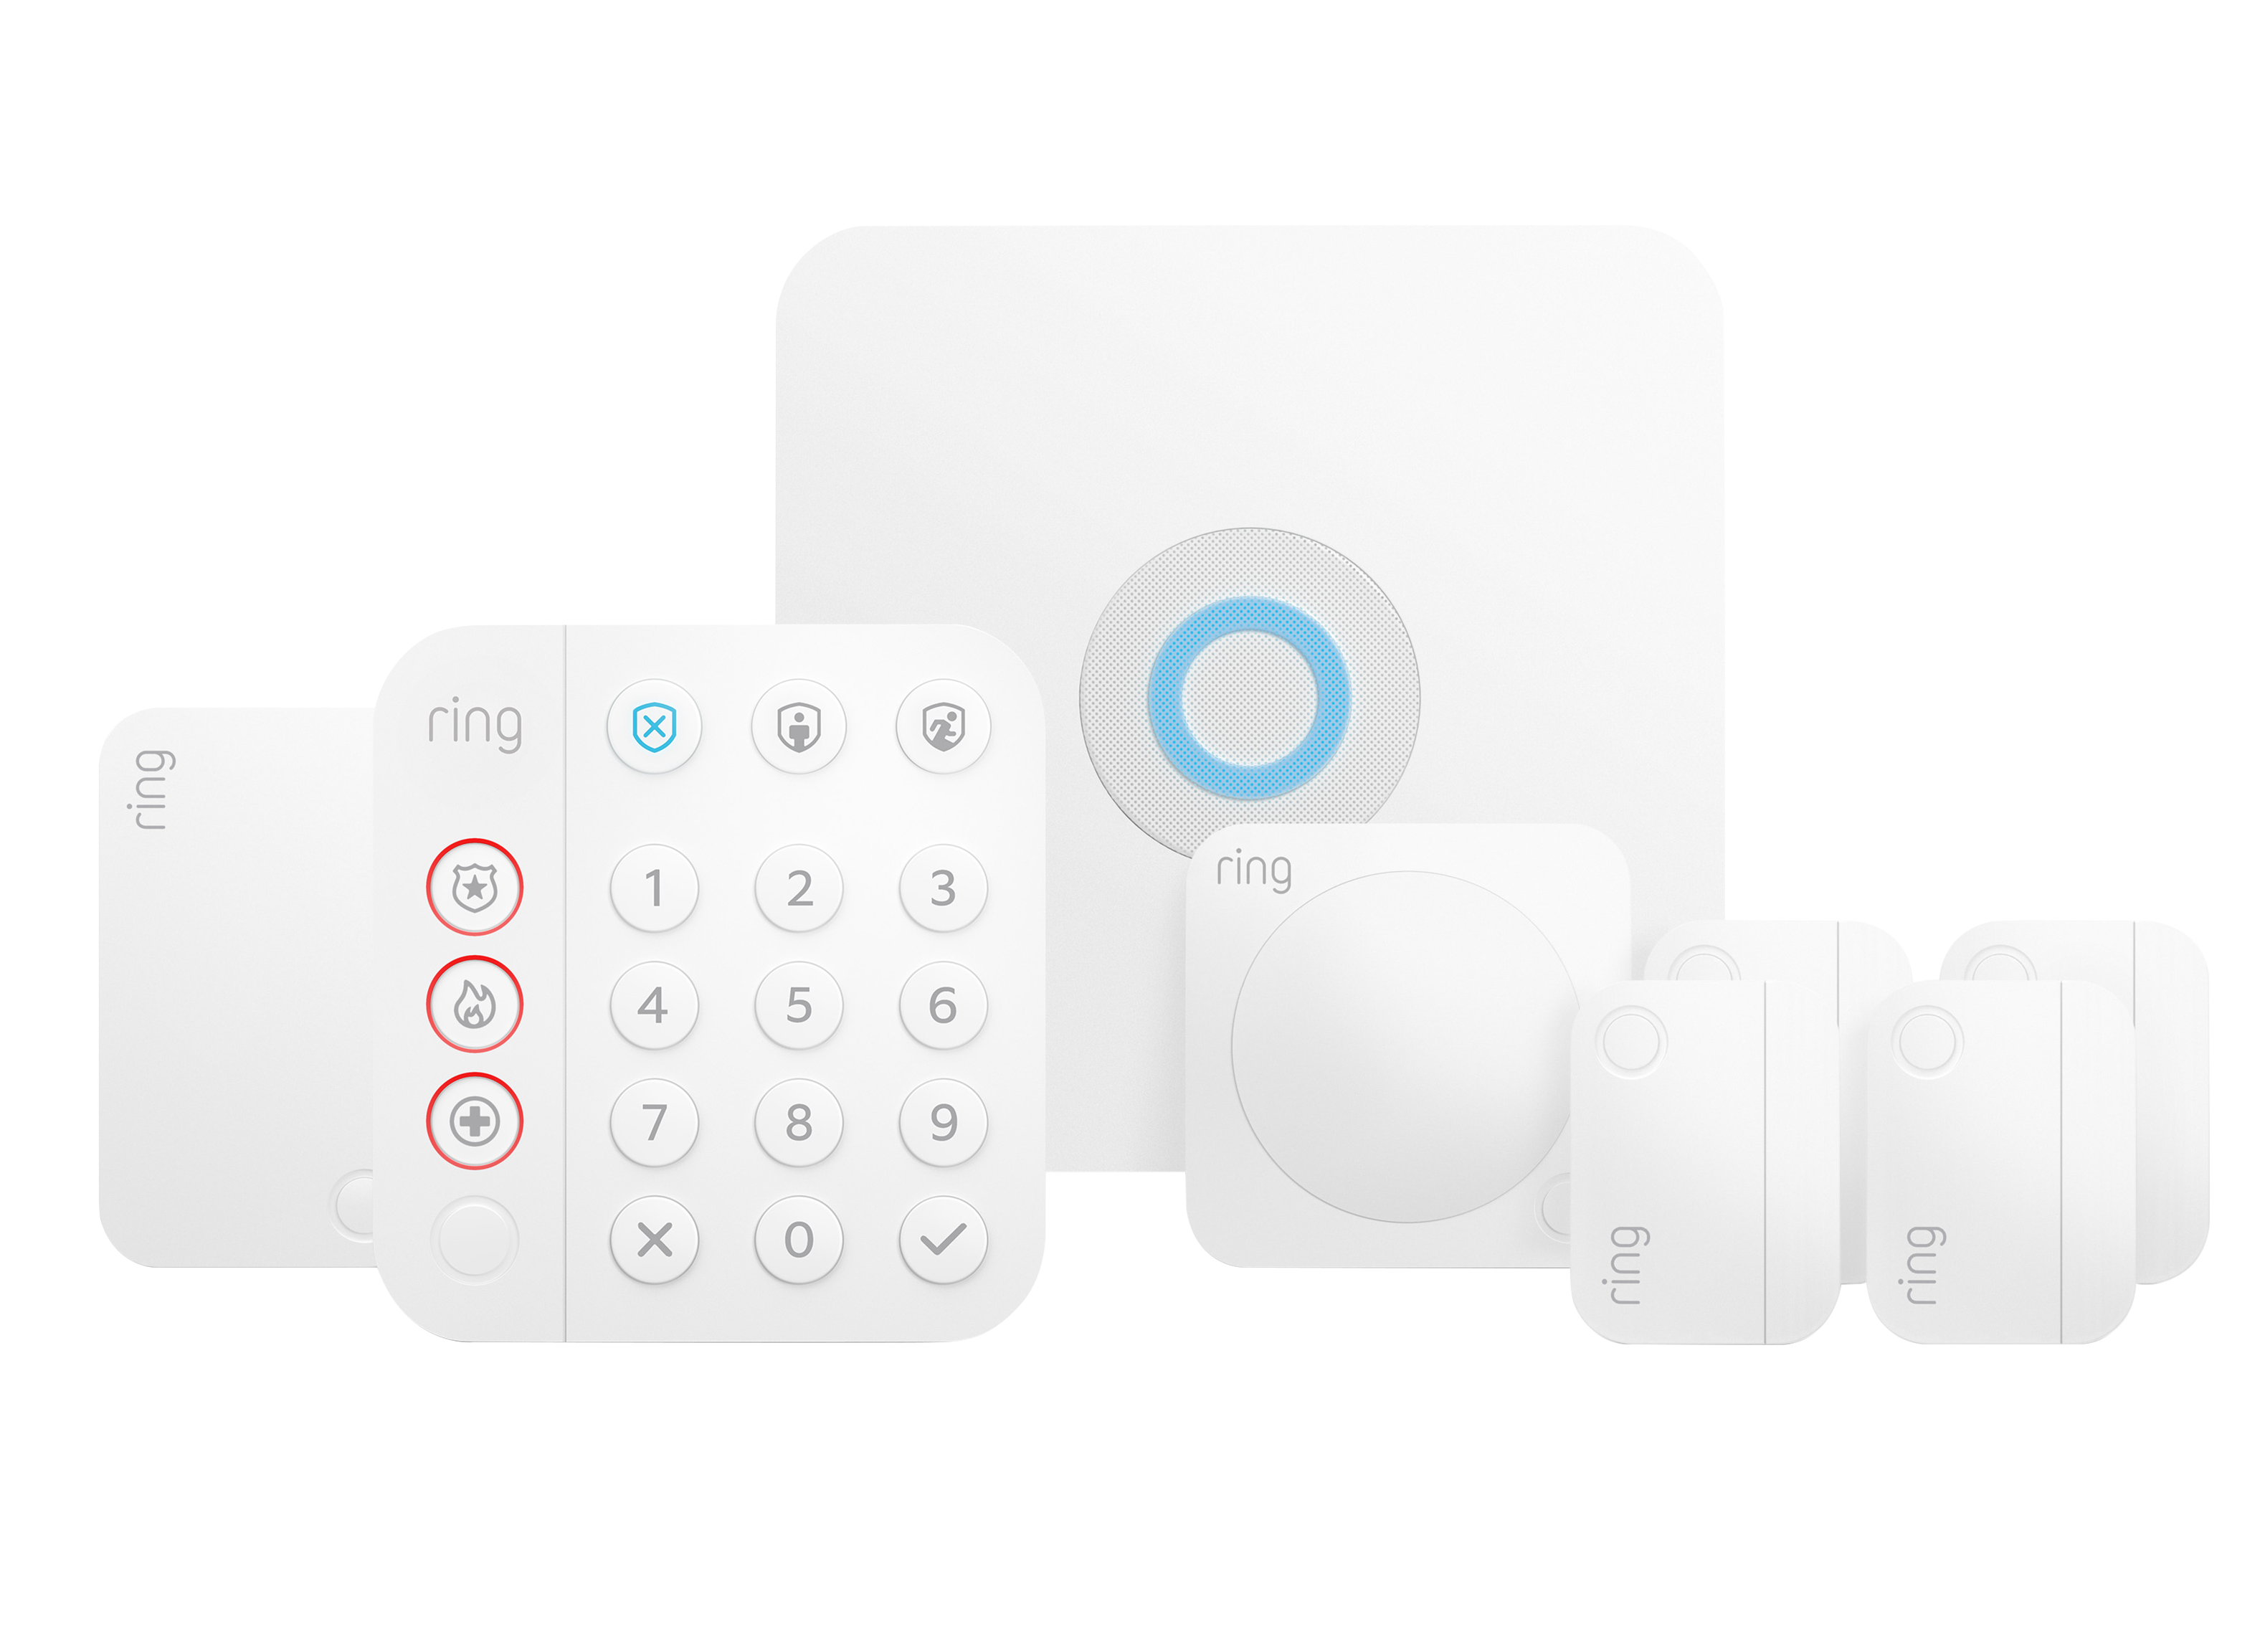 https://crdms.images.consumerreports.org/prod/products/cr/models/405101-diy-home-security-systems-ring-alarm-pro-b08hstjpms-10024328.png